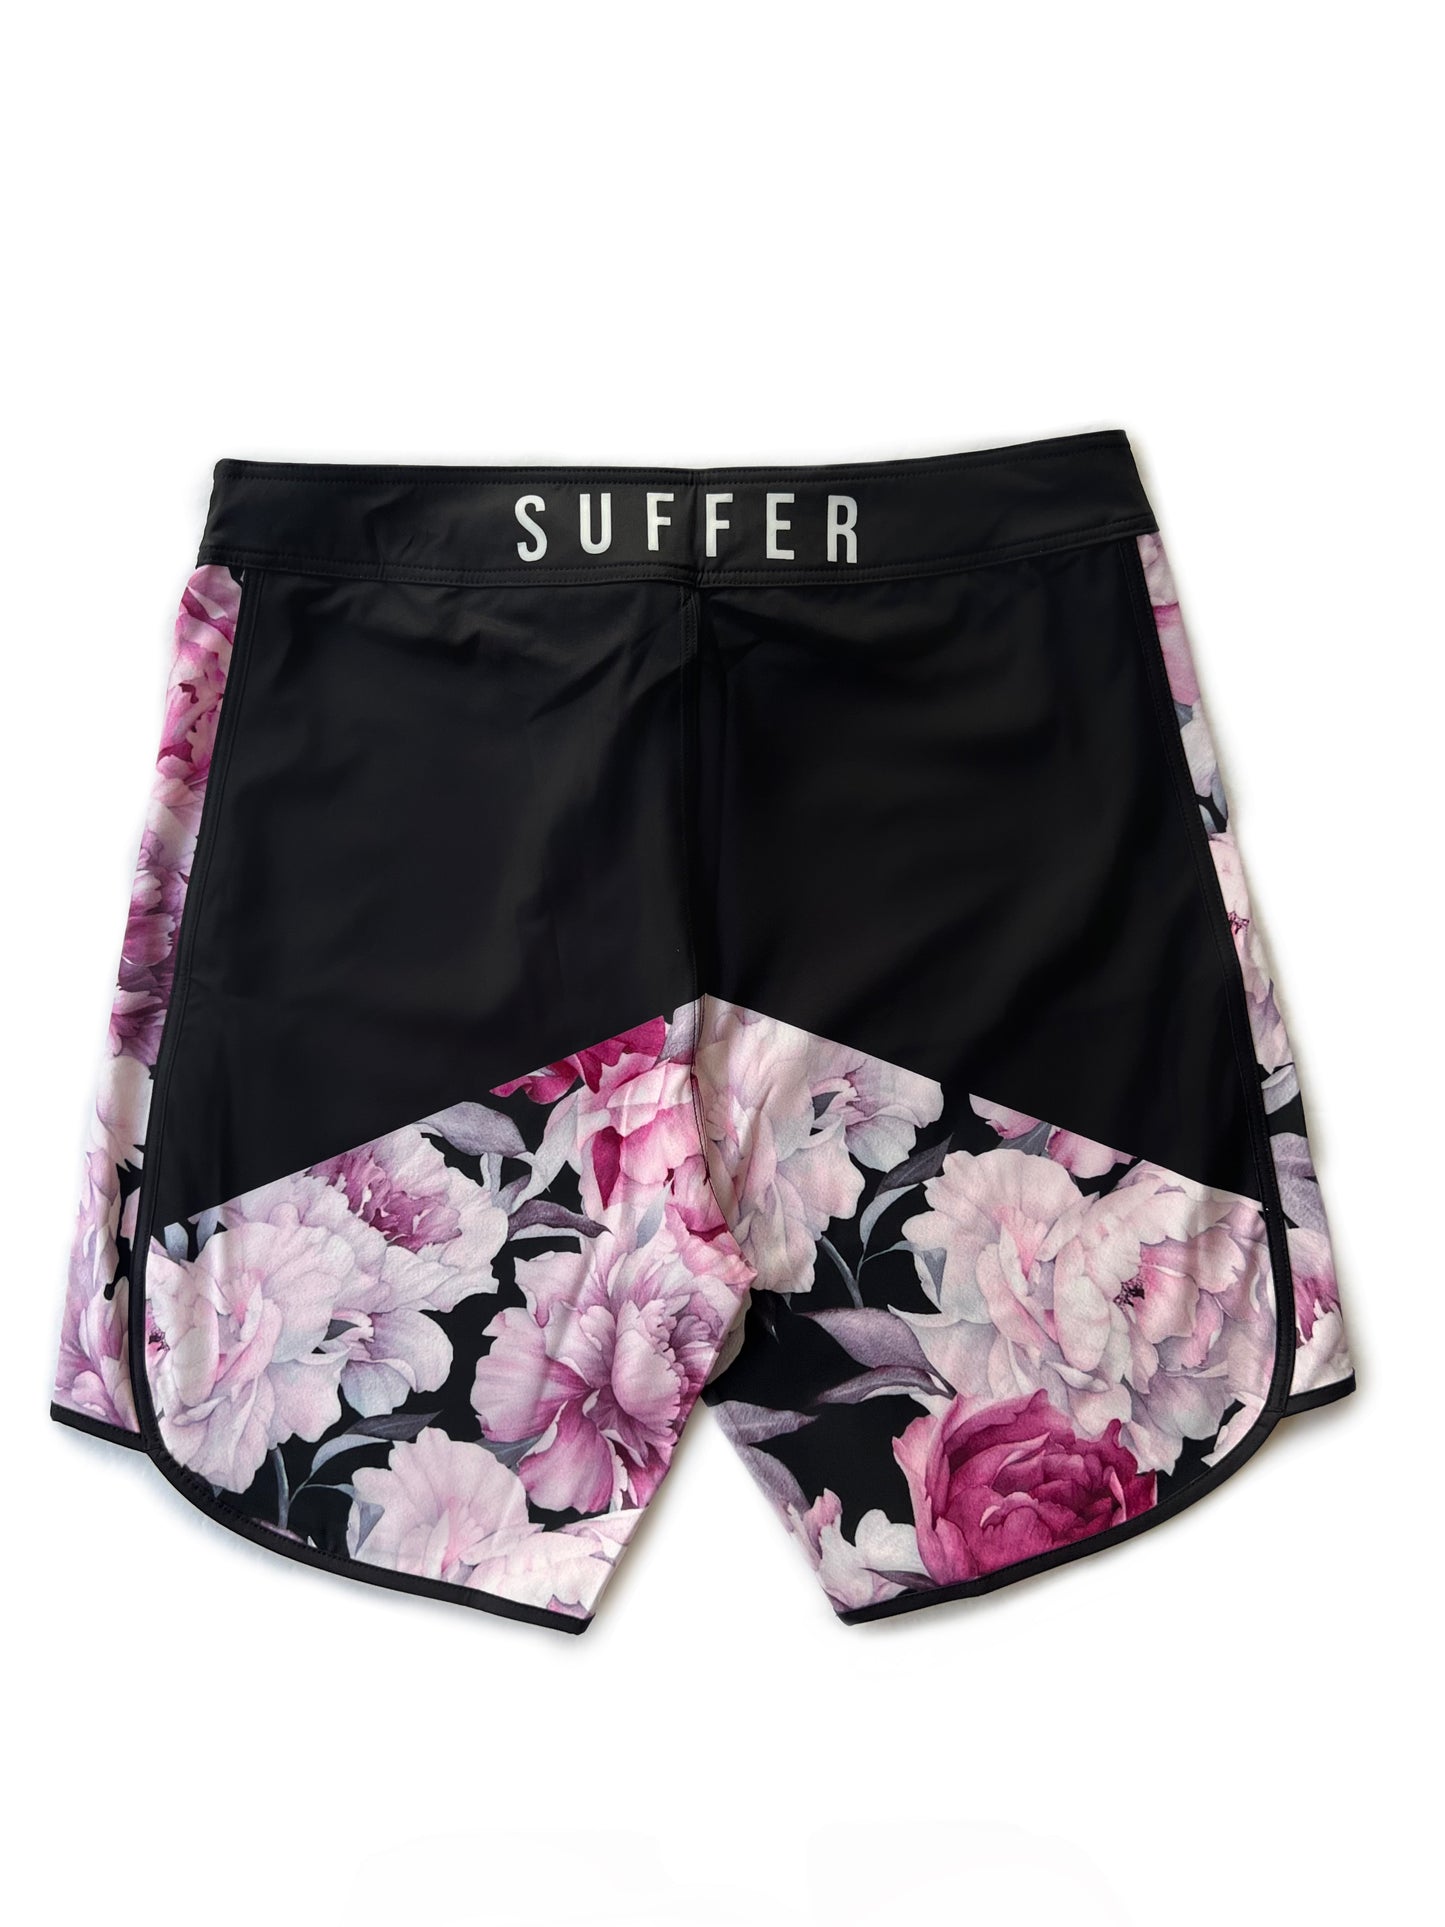 SUFFER Floral